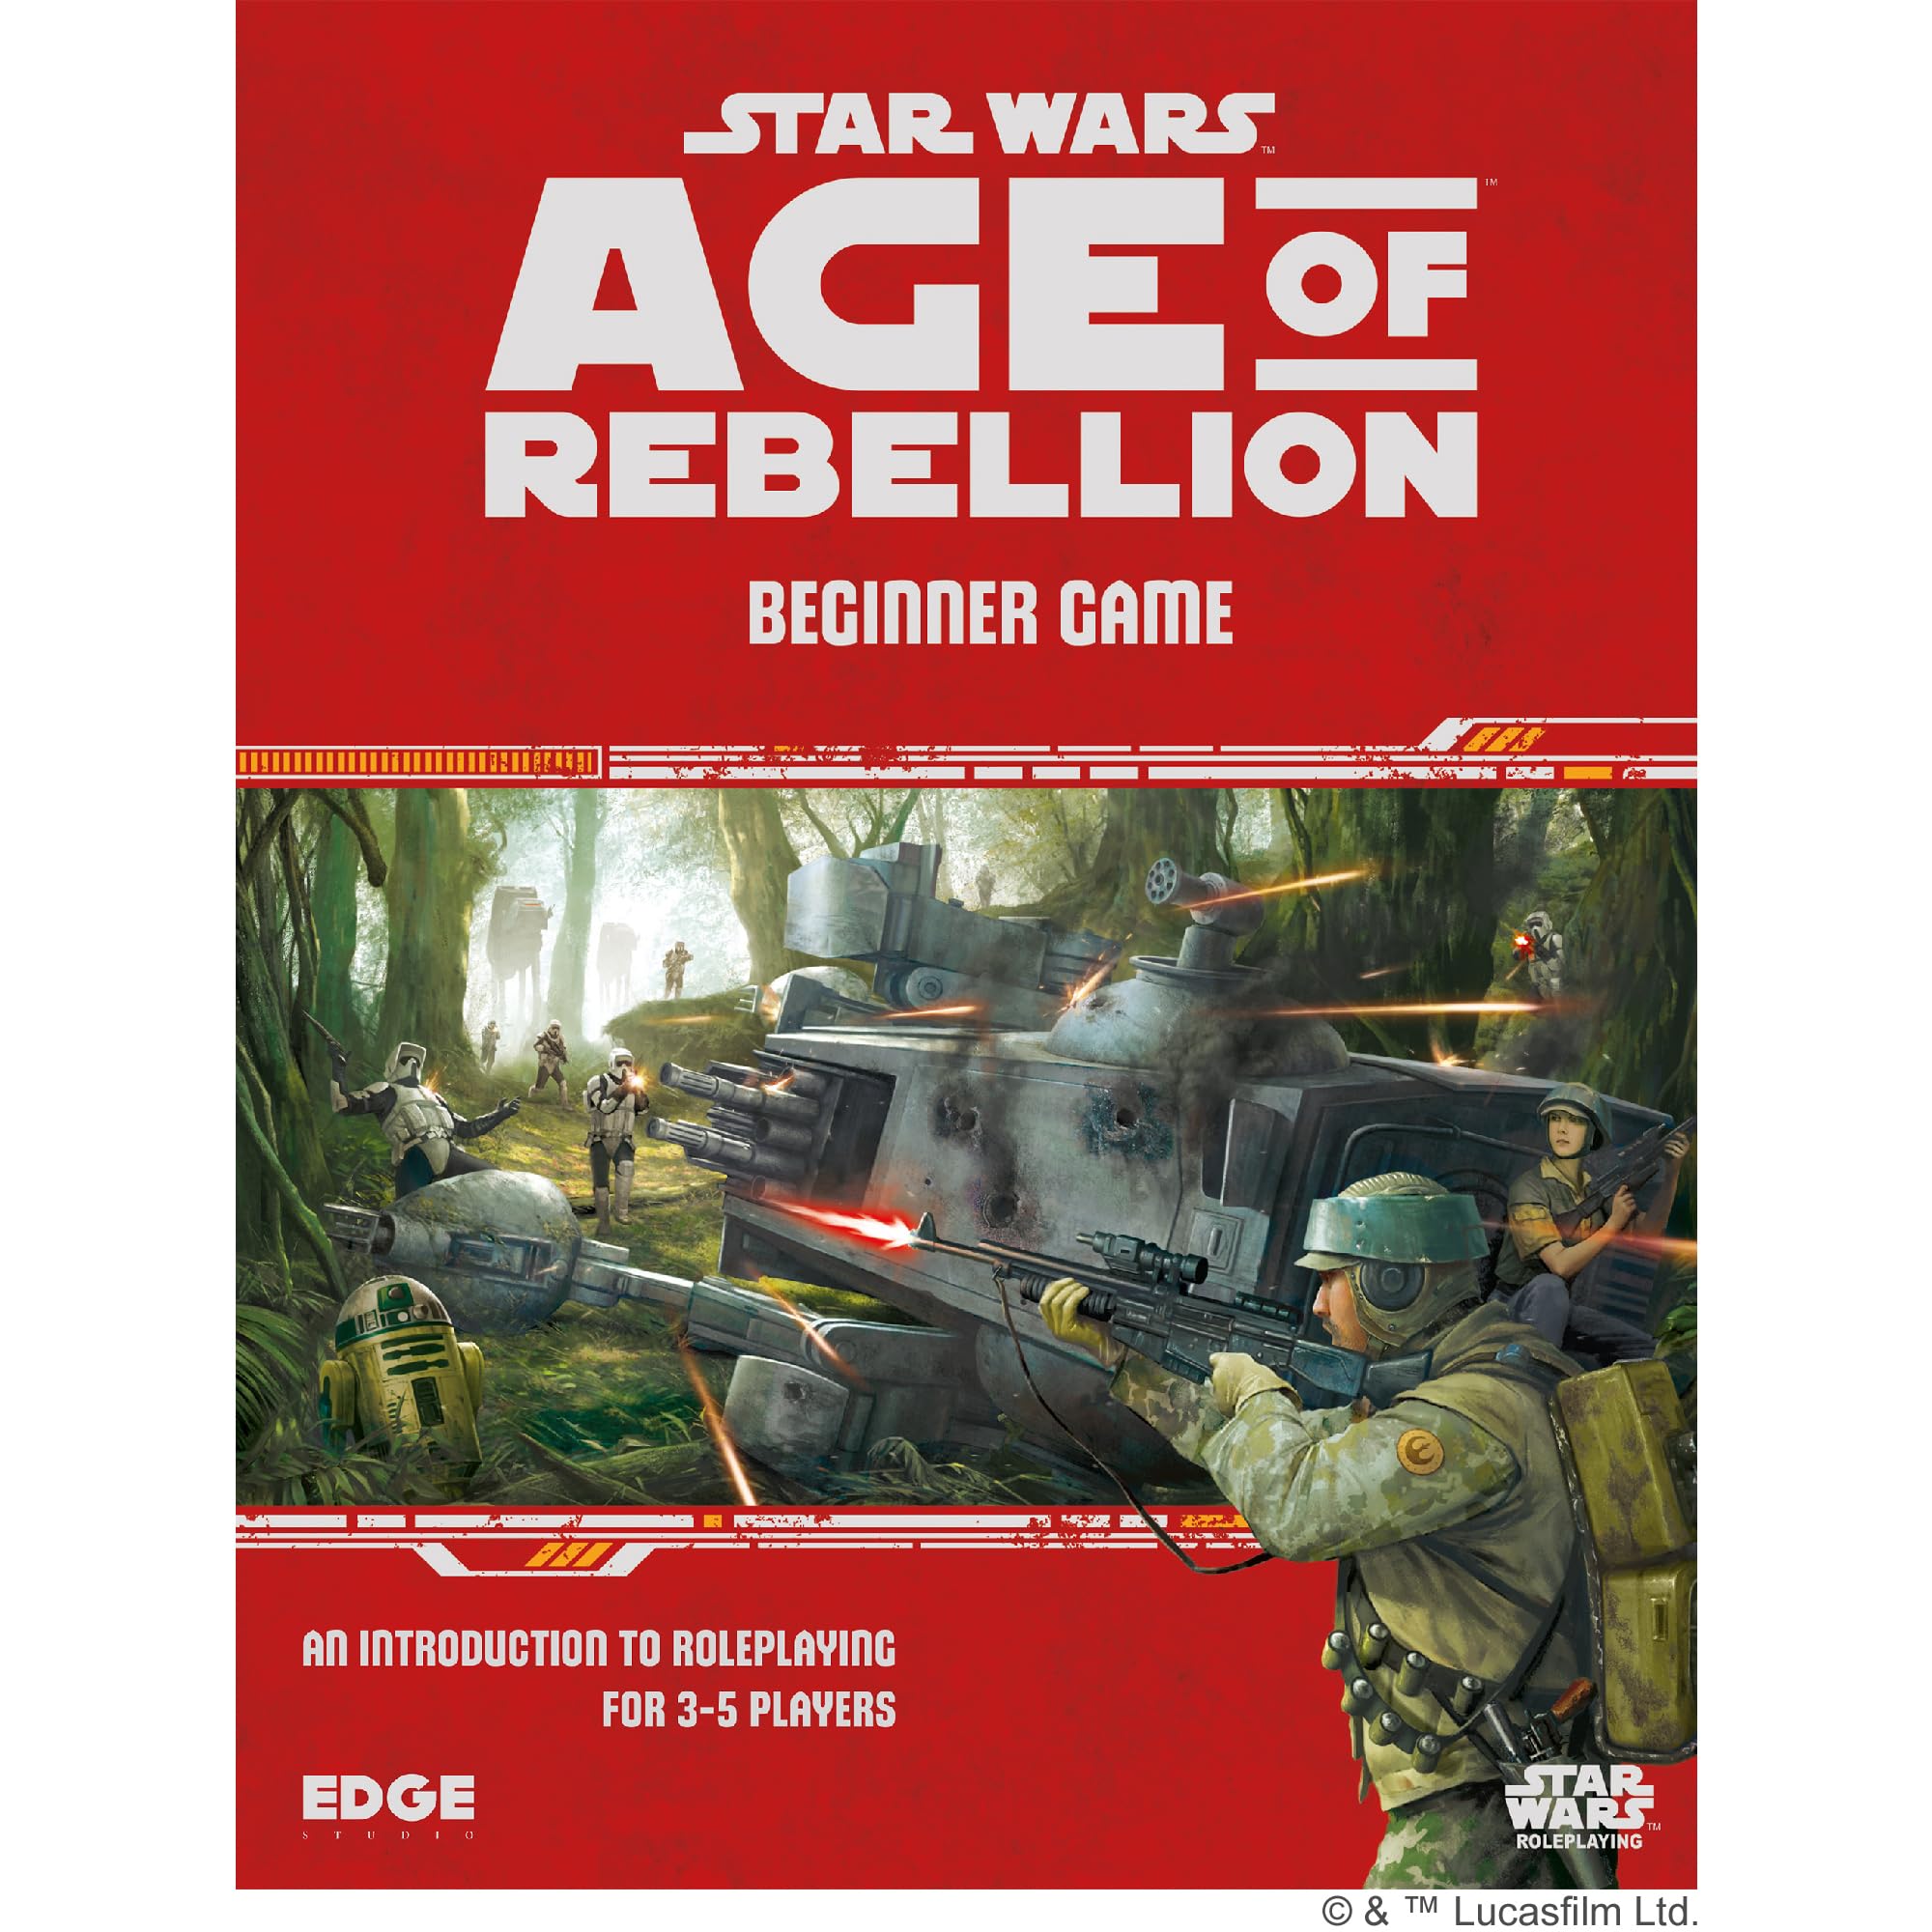 Star Wars - Age of Rebellion: Beginner Game - Dive into Galactic Adventure as a Rebel Alliance Member! Sci-Fi Roleplaying Game, Ages 10+, 3-5 Players, 1 Hour Playtime, Made by EDGE Studio